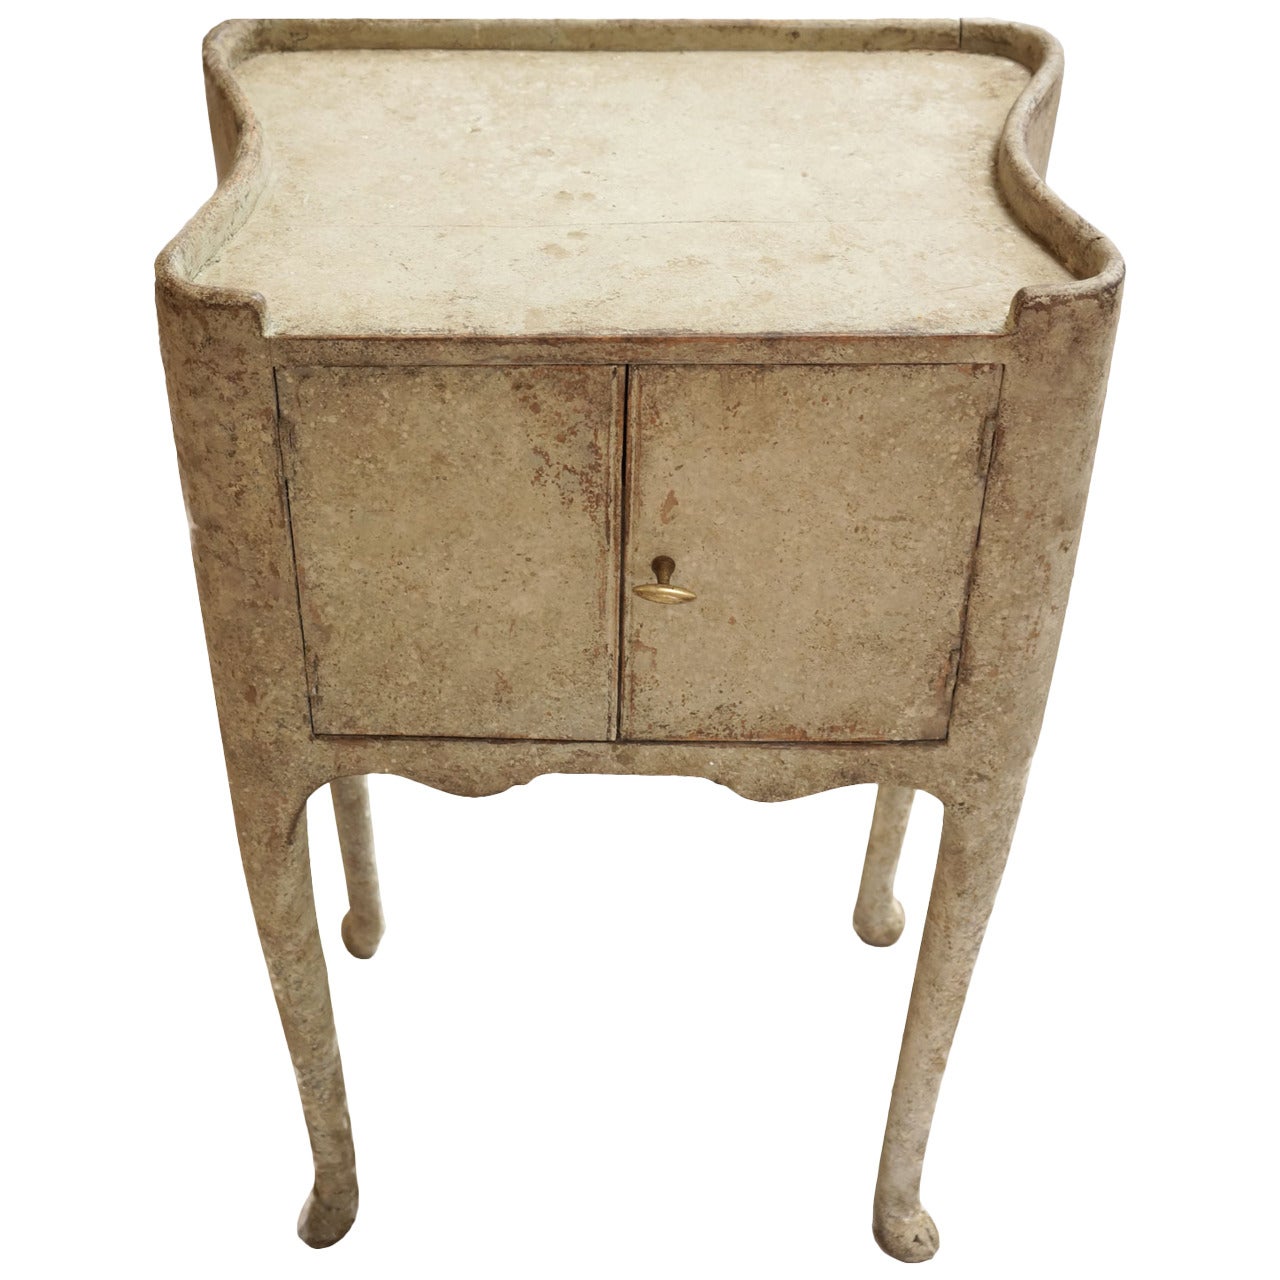 Early 19th Century Swedish Painted Side Table Cabinet For Sale